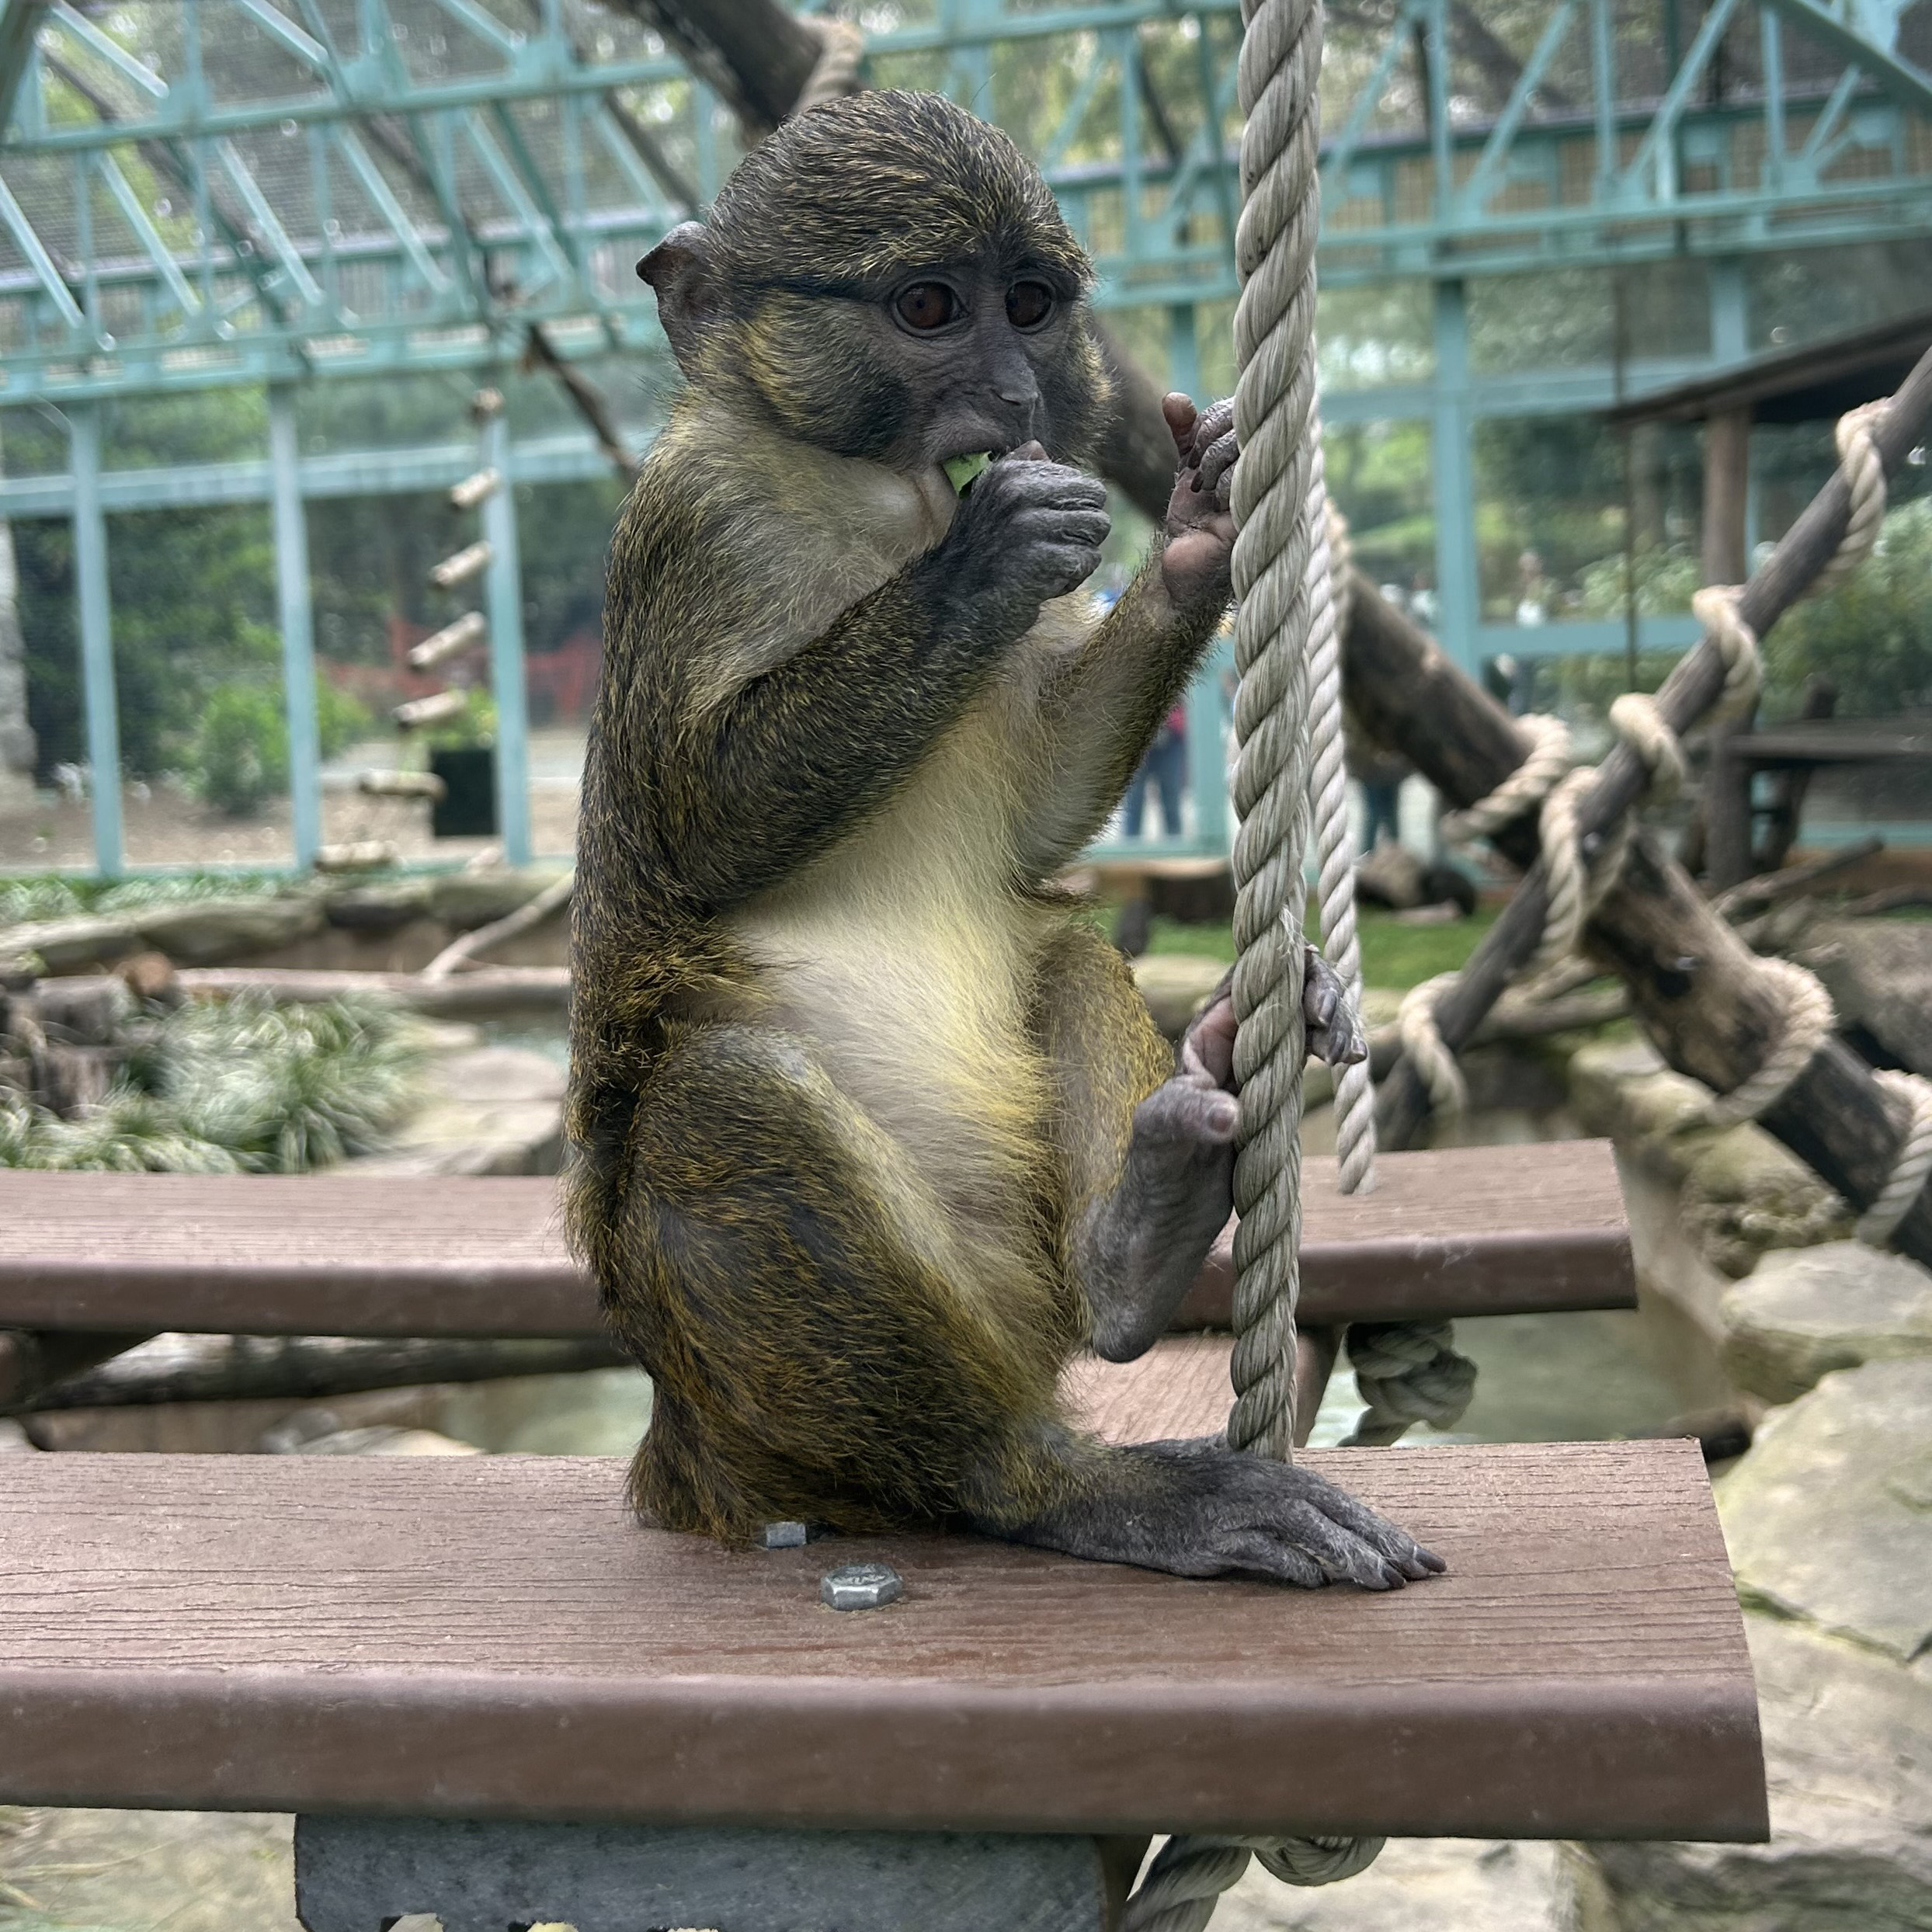 A nine-month-old swamp monkey perches on a swing in his outdoor exhibit area.